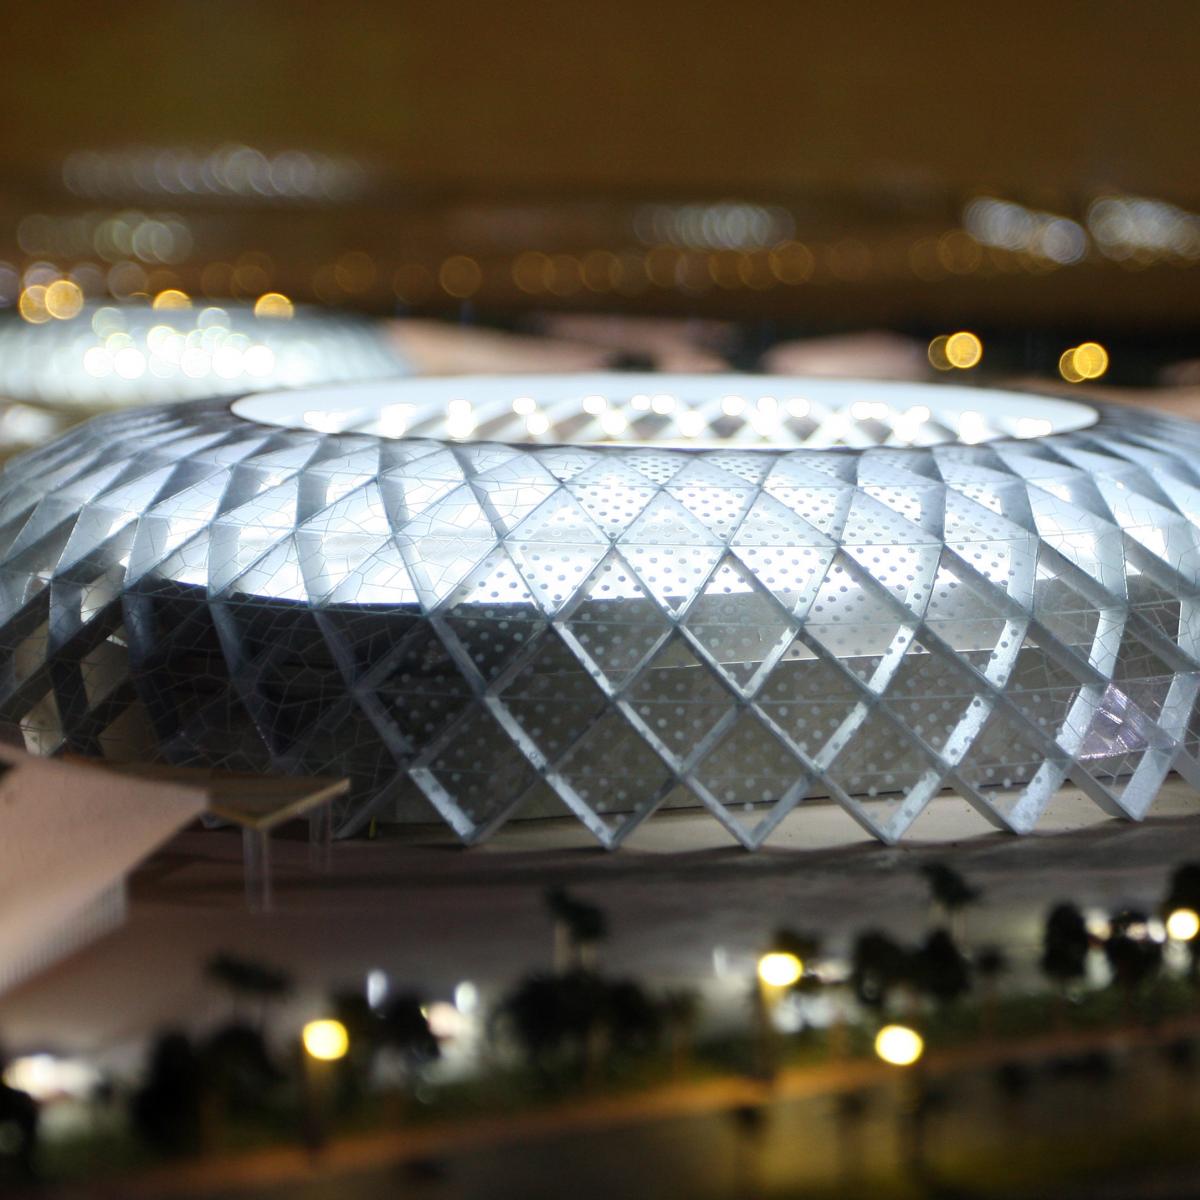 Qatar to Reduce Number of World Cup 2022 Stadiums | Bleacher Report